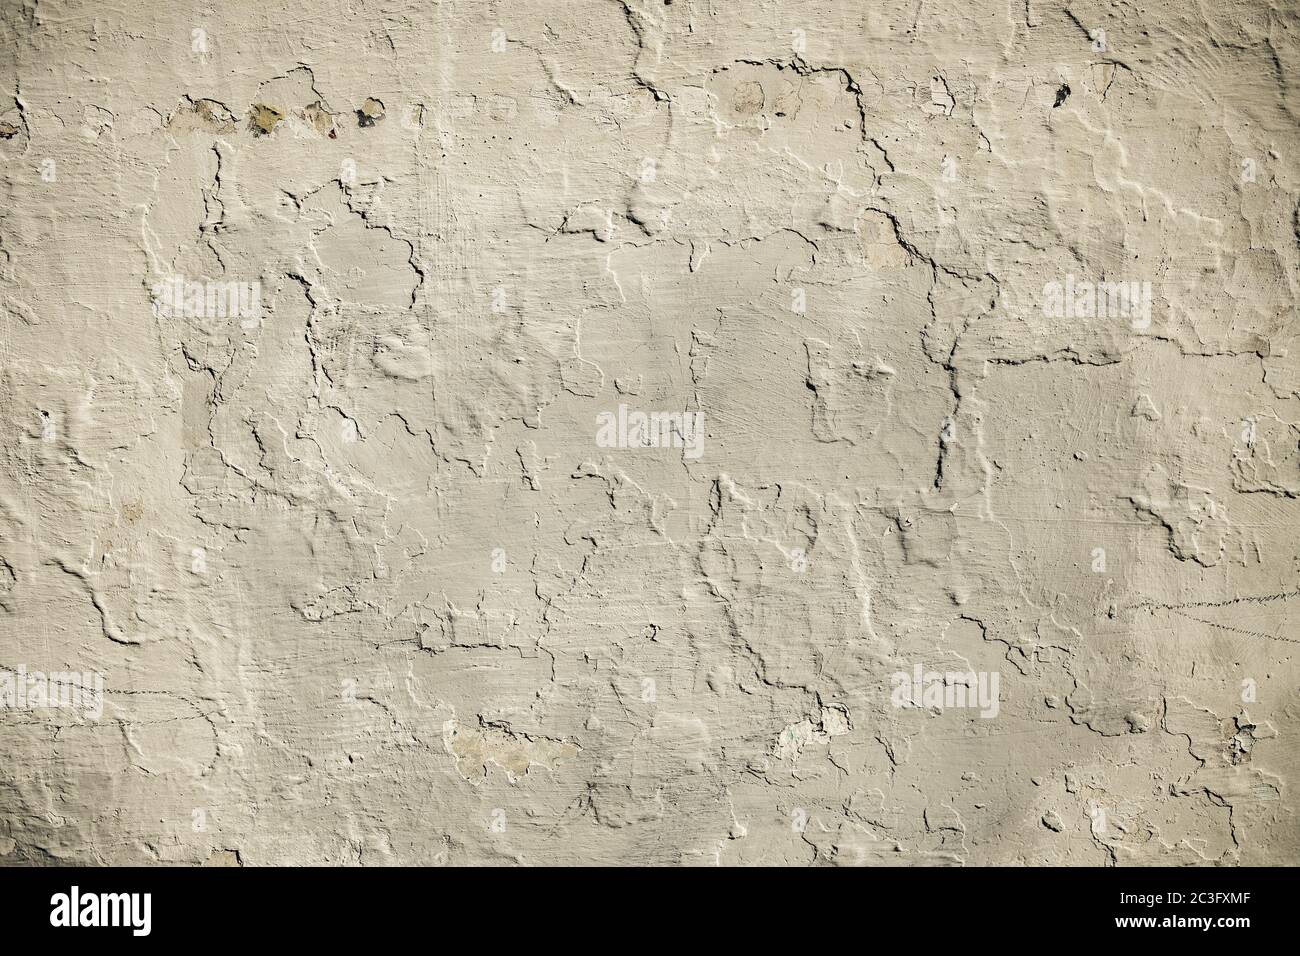 Grunge wall texture. High resolution vintage background. Stock Photo